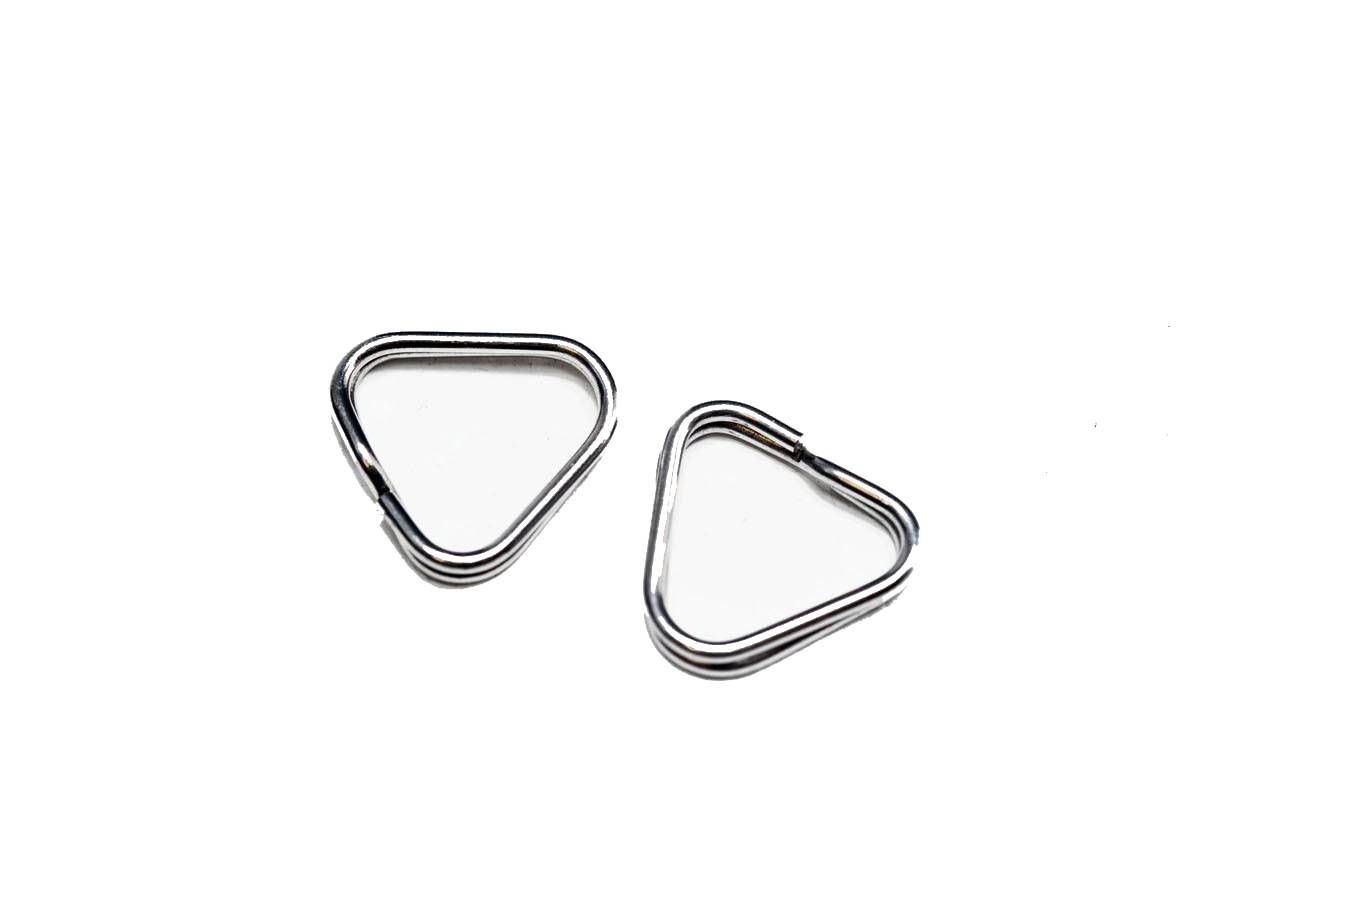 Product Image of 2 x Triangular Split Rings (pair) for Camera Straps D-Ring Connectors Canon